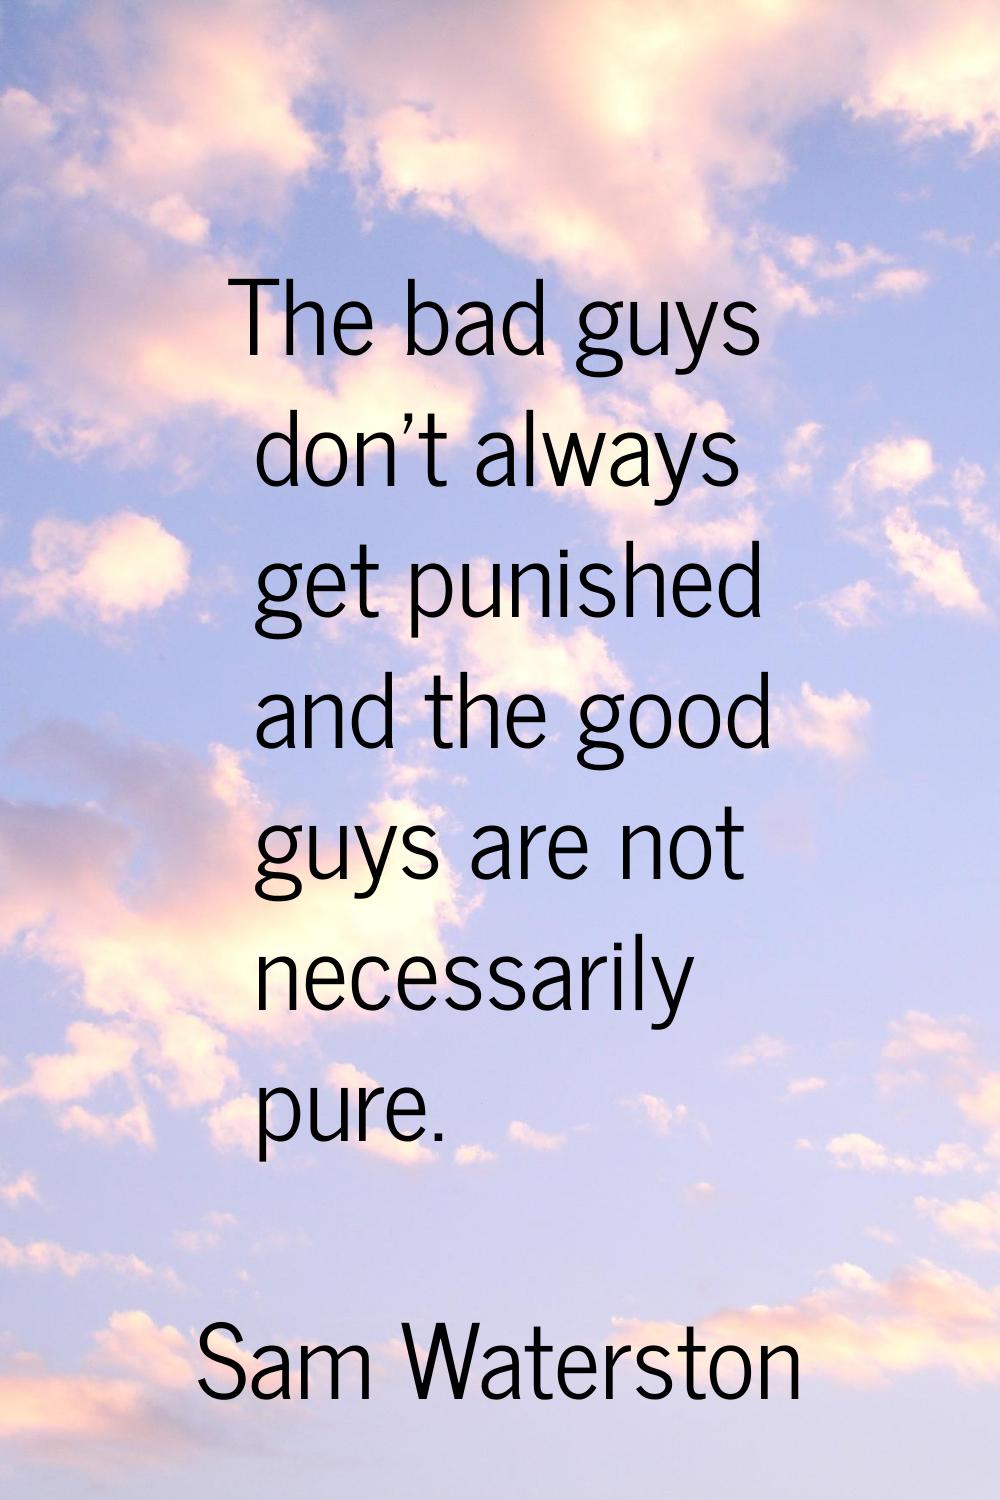 The bad guys don't always get punished and the good guys are not necessarily pure.